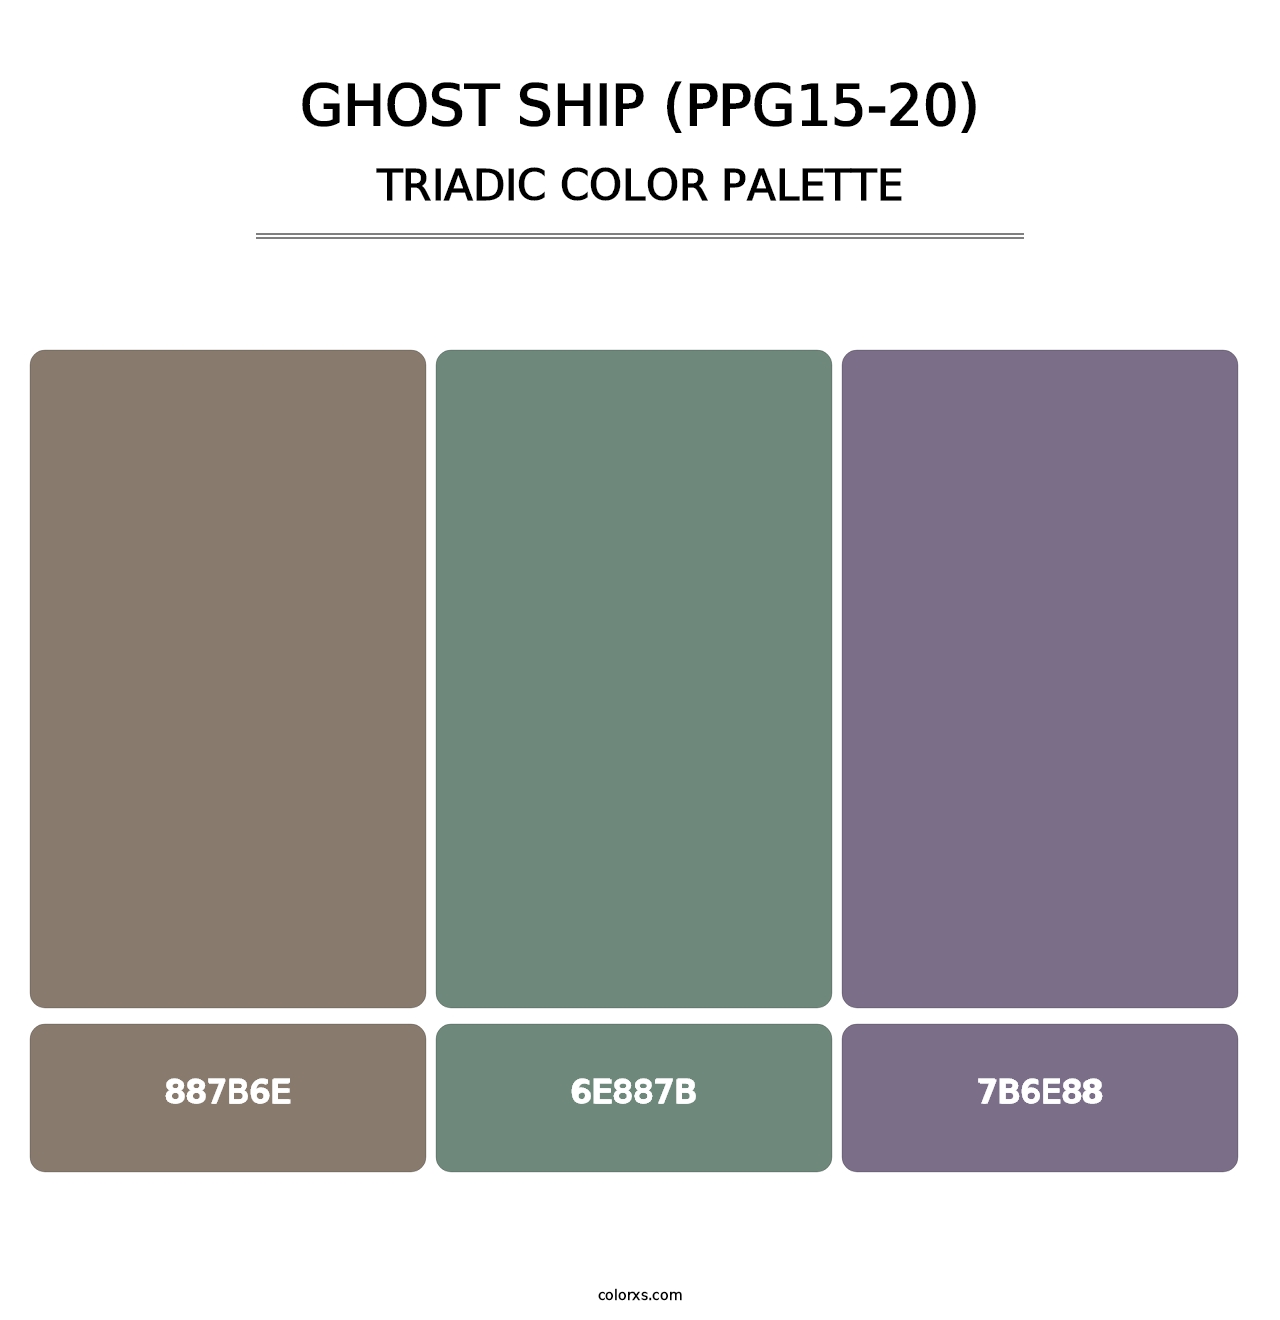 Ghost Ship (PPG15-20) - Triadic Color Palette